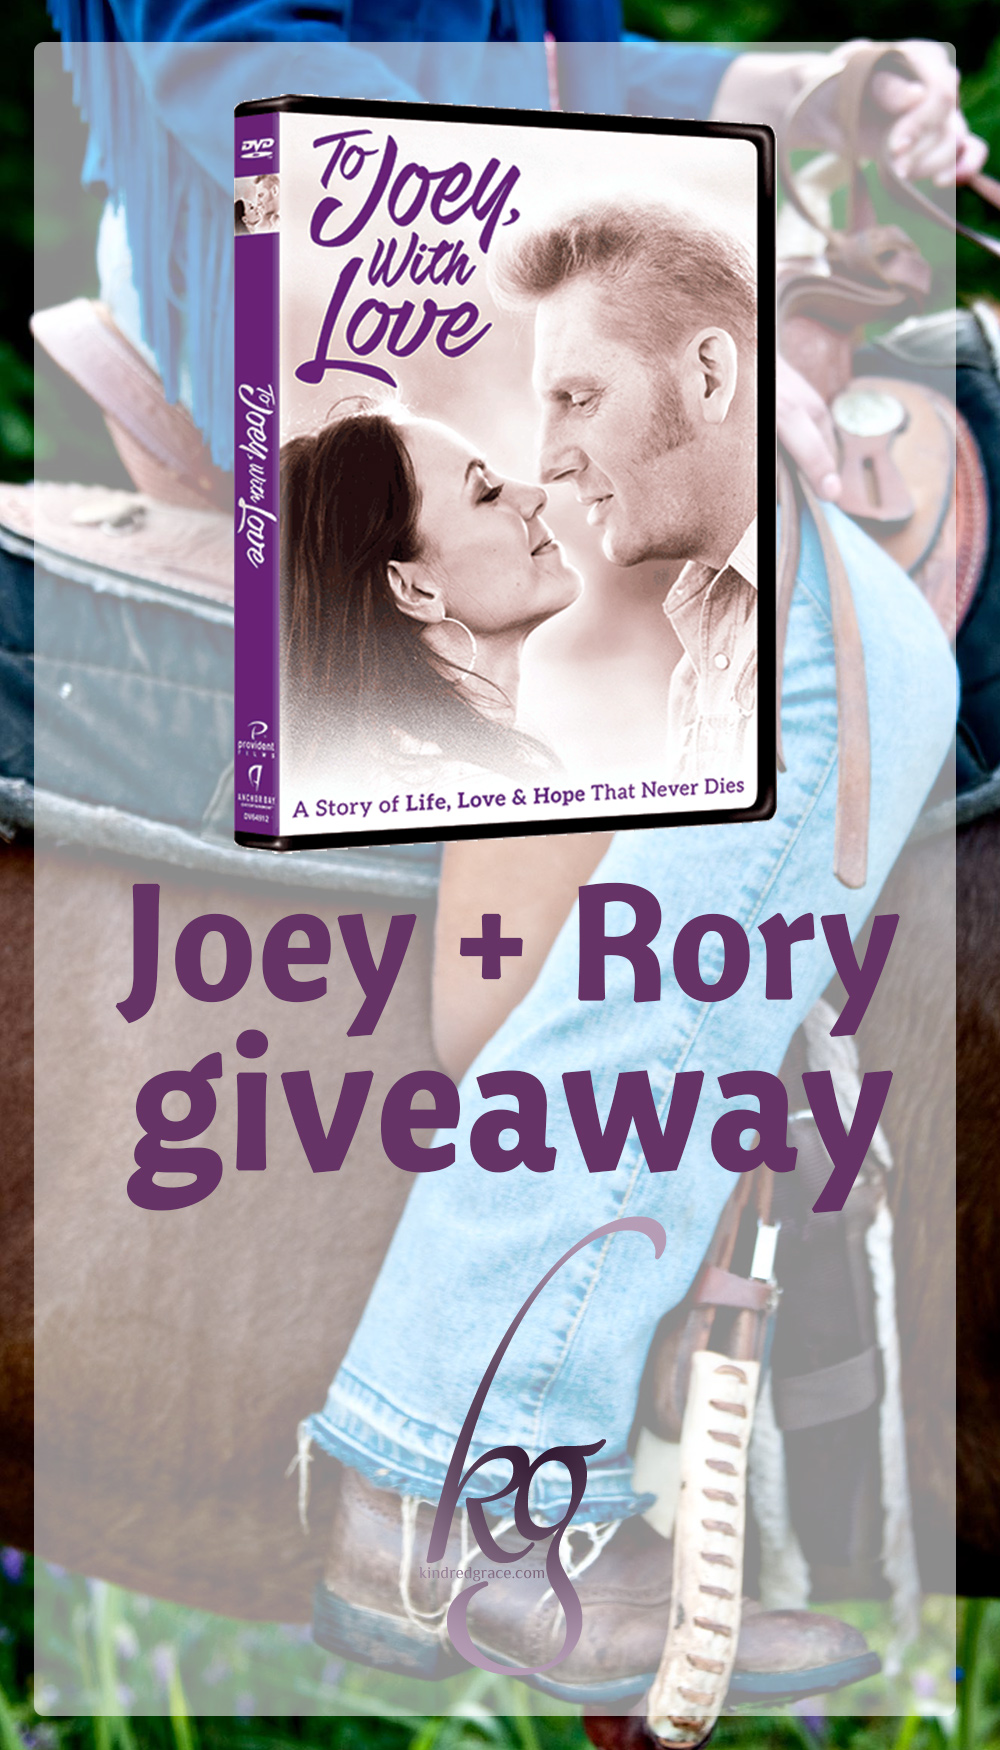 It’s not every day that I watch a movie already knowing how it will end. That’s why Rory’s words at the beginning of the film "To Joey, With Love" captured my attention: We believed God would give us a great story... And He did. (Enter to win your own copy of the DVD!)